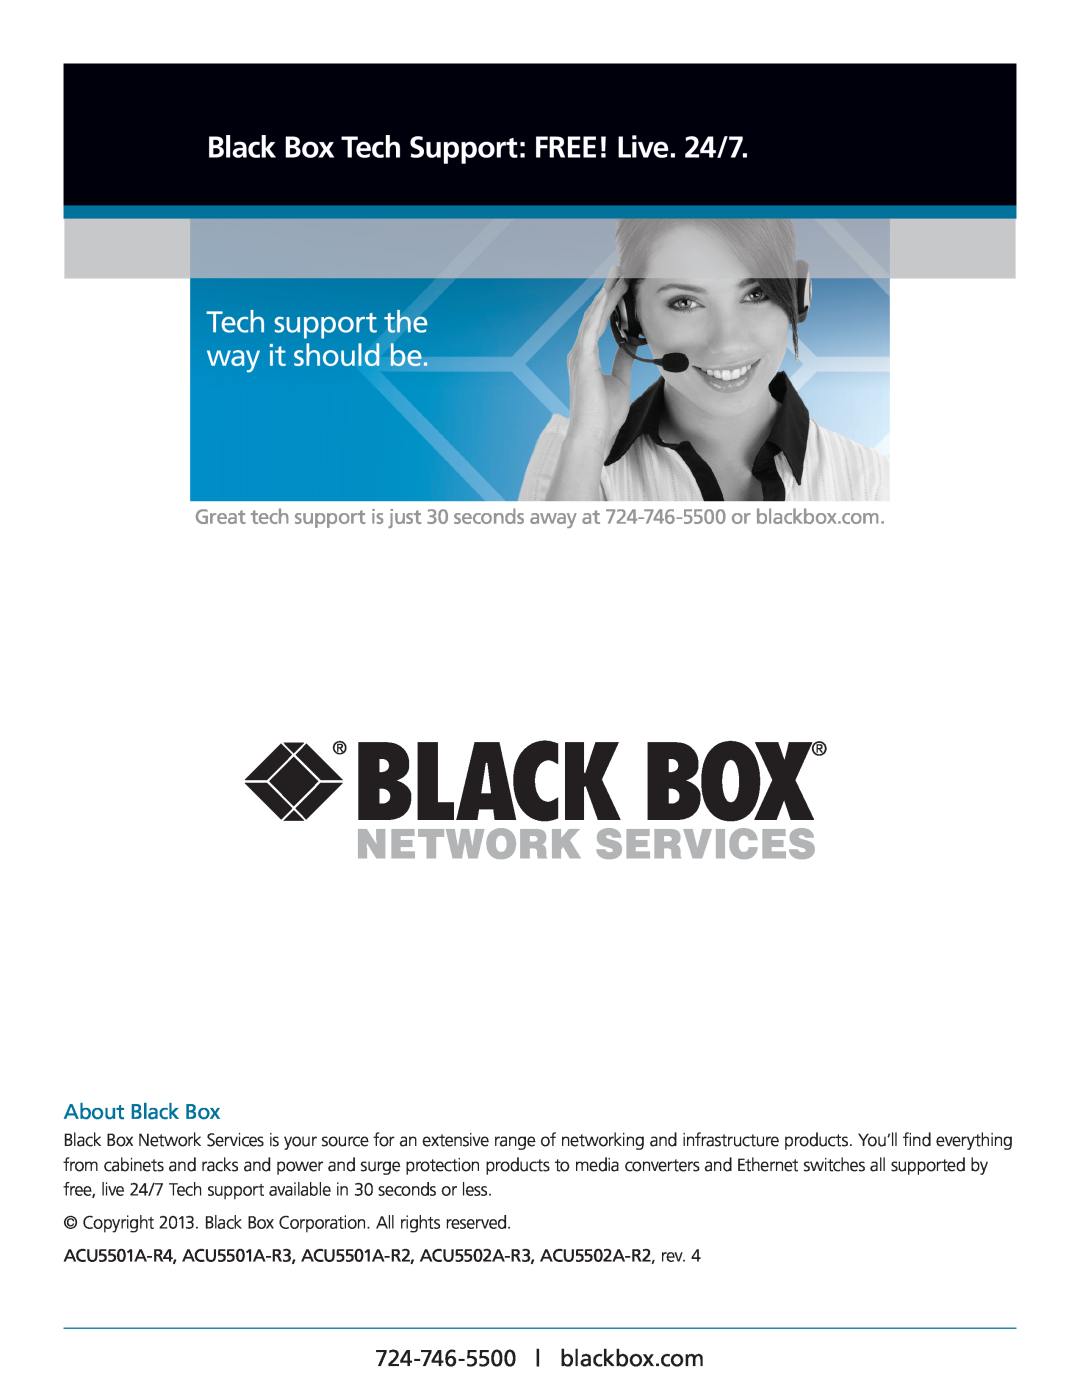 Black Box ACU5501A-R4 manual About Black Box, Network Services, Black Box Tech Support FREE! Live. 24/7 